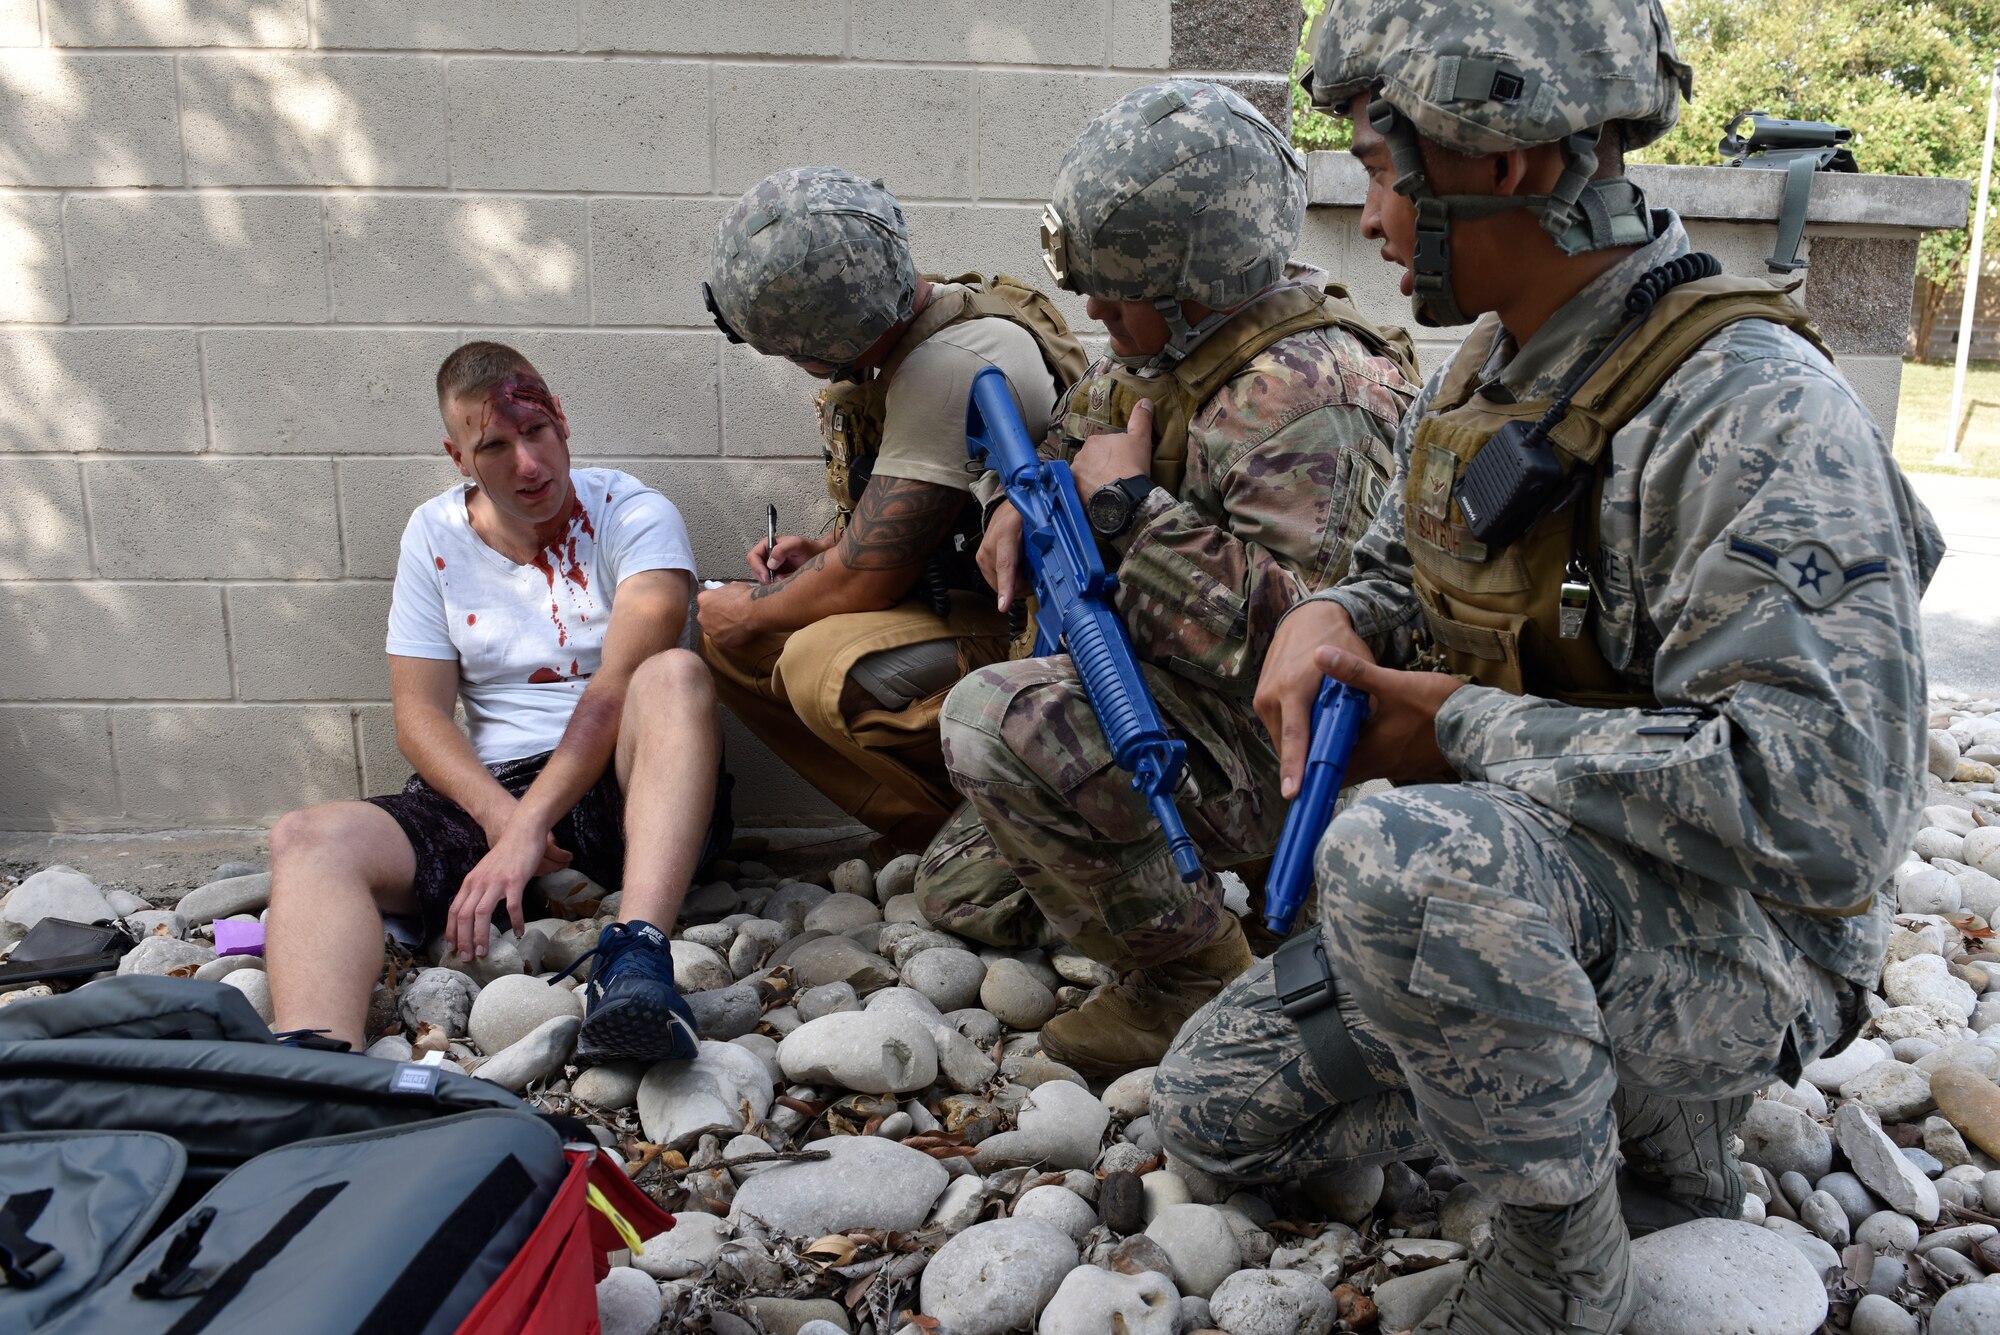 Members of the 47th Security Forces Squadron interviews a simulated active shooter victim during a training exercise at Laughlin Air Force Base, Texas, July 22, 2019. The exercise, aimed at bolstering crisis readiness and response capabilities, simulated a hostage situation that lasted for nearly two hours. (U.S. Air Force photo by Staff Sgt. Benjamin N. Valmoja)